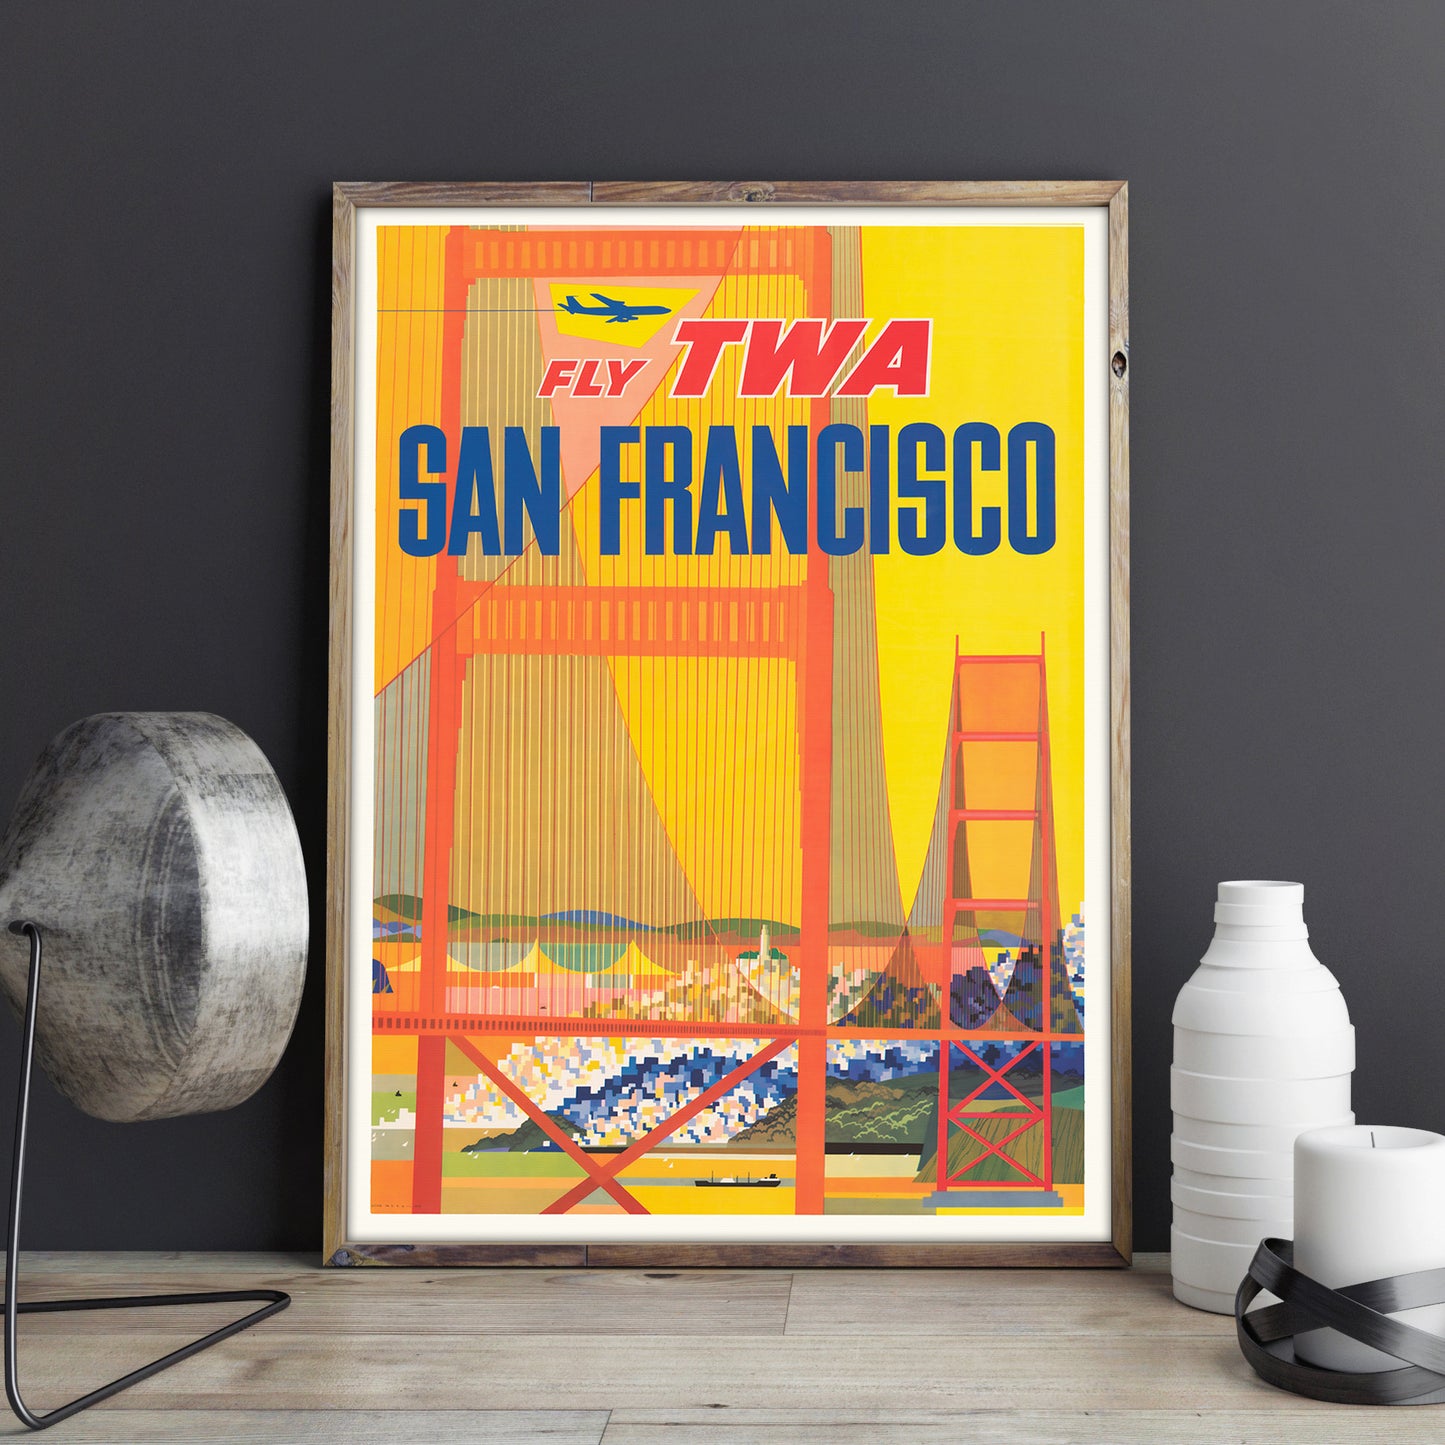 San Francisco Travel Poster, featuring Fly TWA